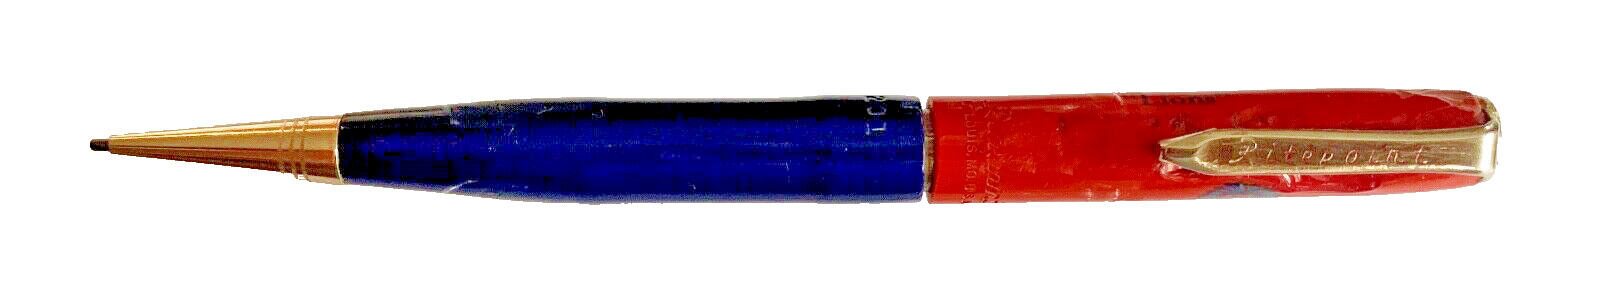 VINTAGE RITEPOINT ADVERTISING MECHANICAL PENCIL, RED / BLUE & CHROME, 1960'S